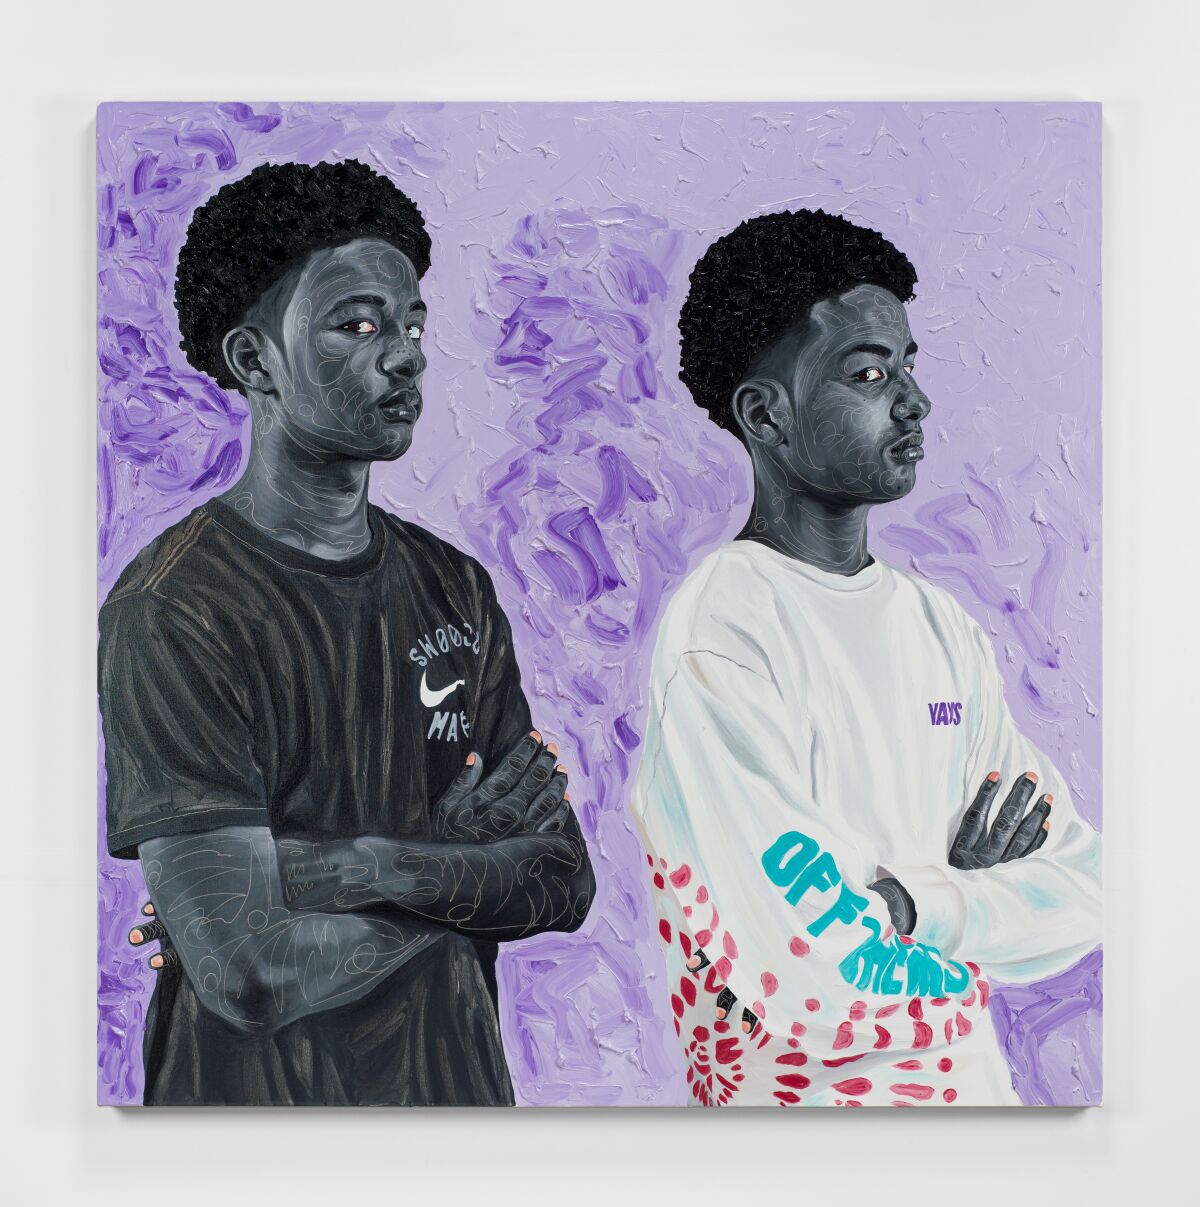 A canvas with a textured lavender background shows two young Black men with their arms crossed